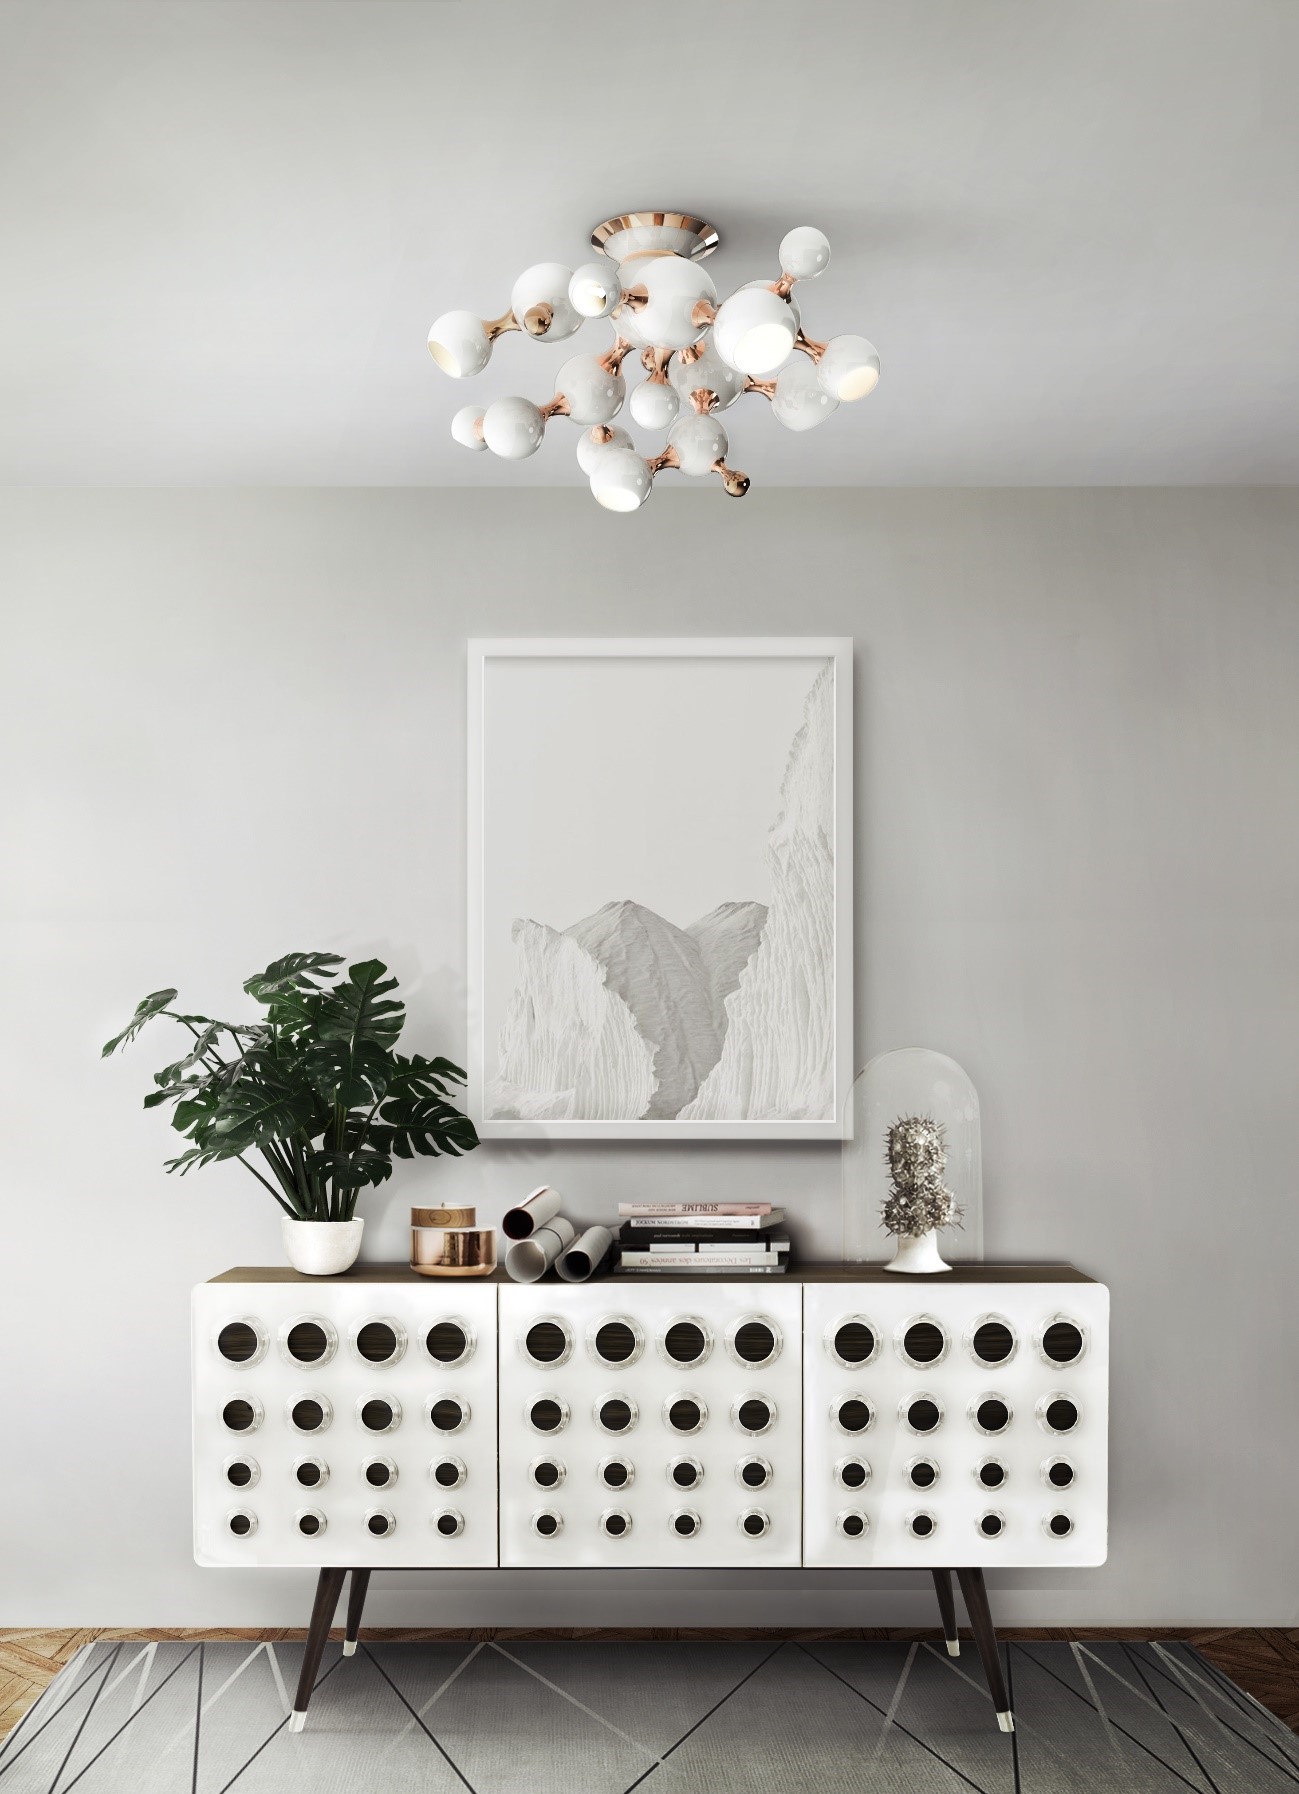 6 Powerful Lighting Fixture Ideas To Upgrade Your Entryway Décor! 🚪